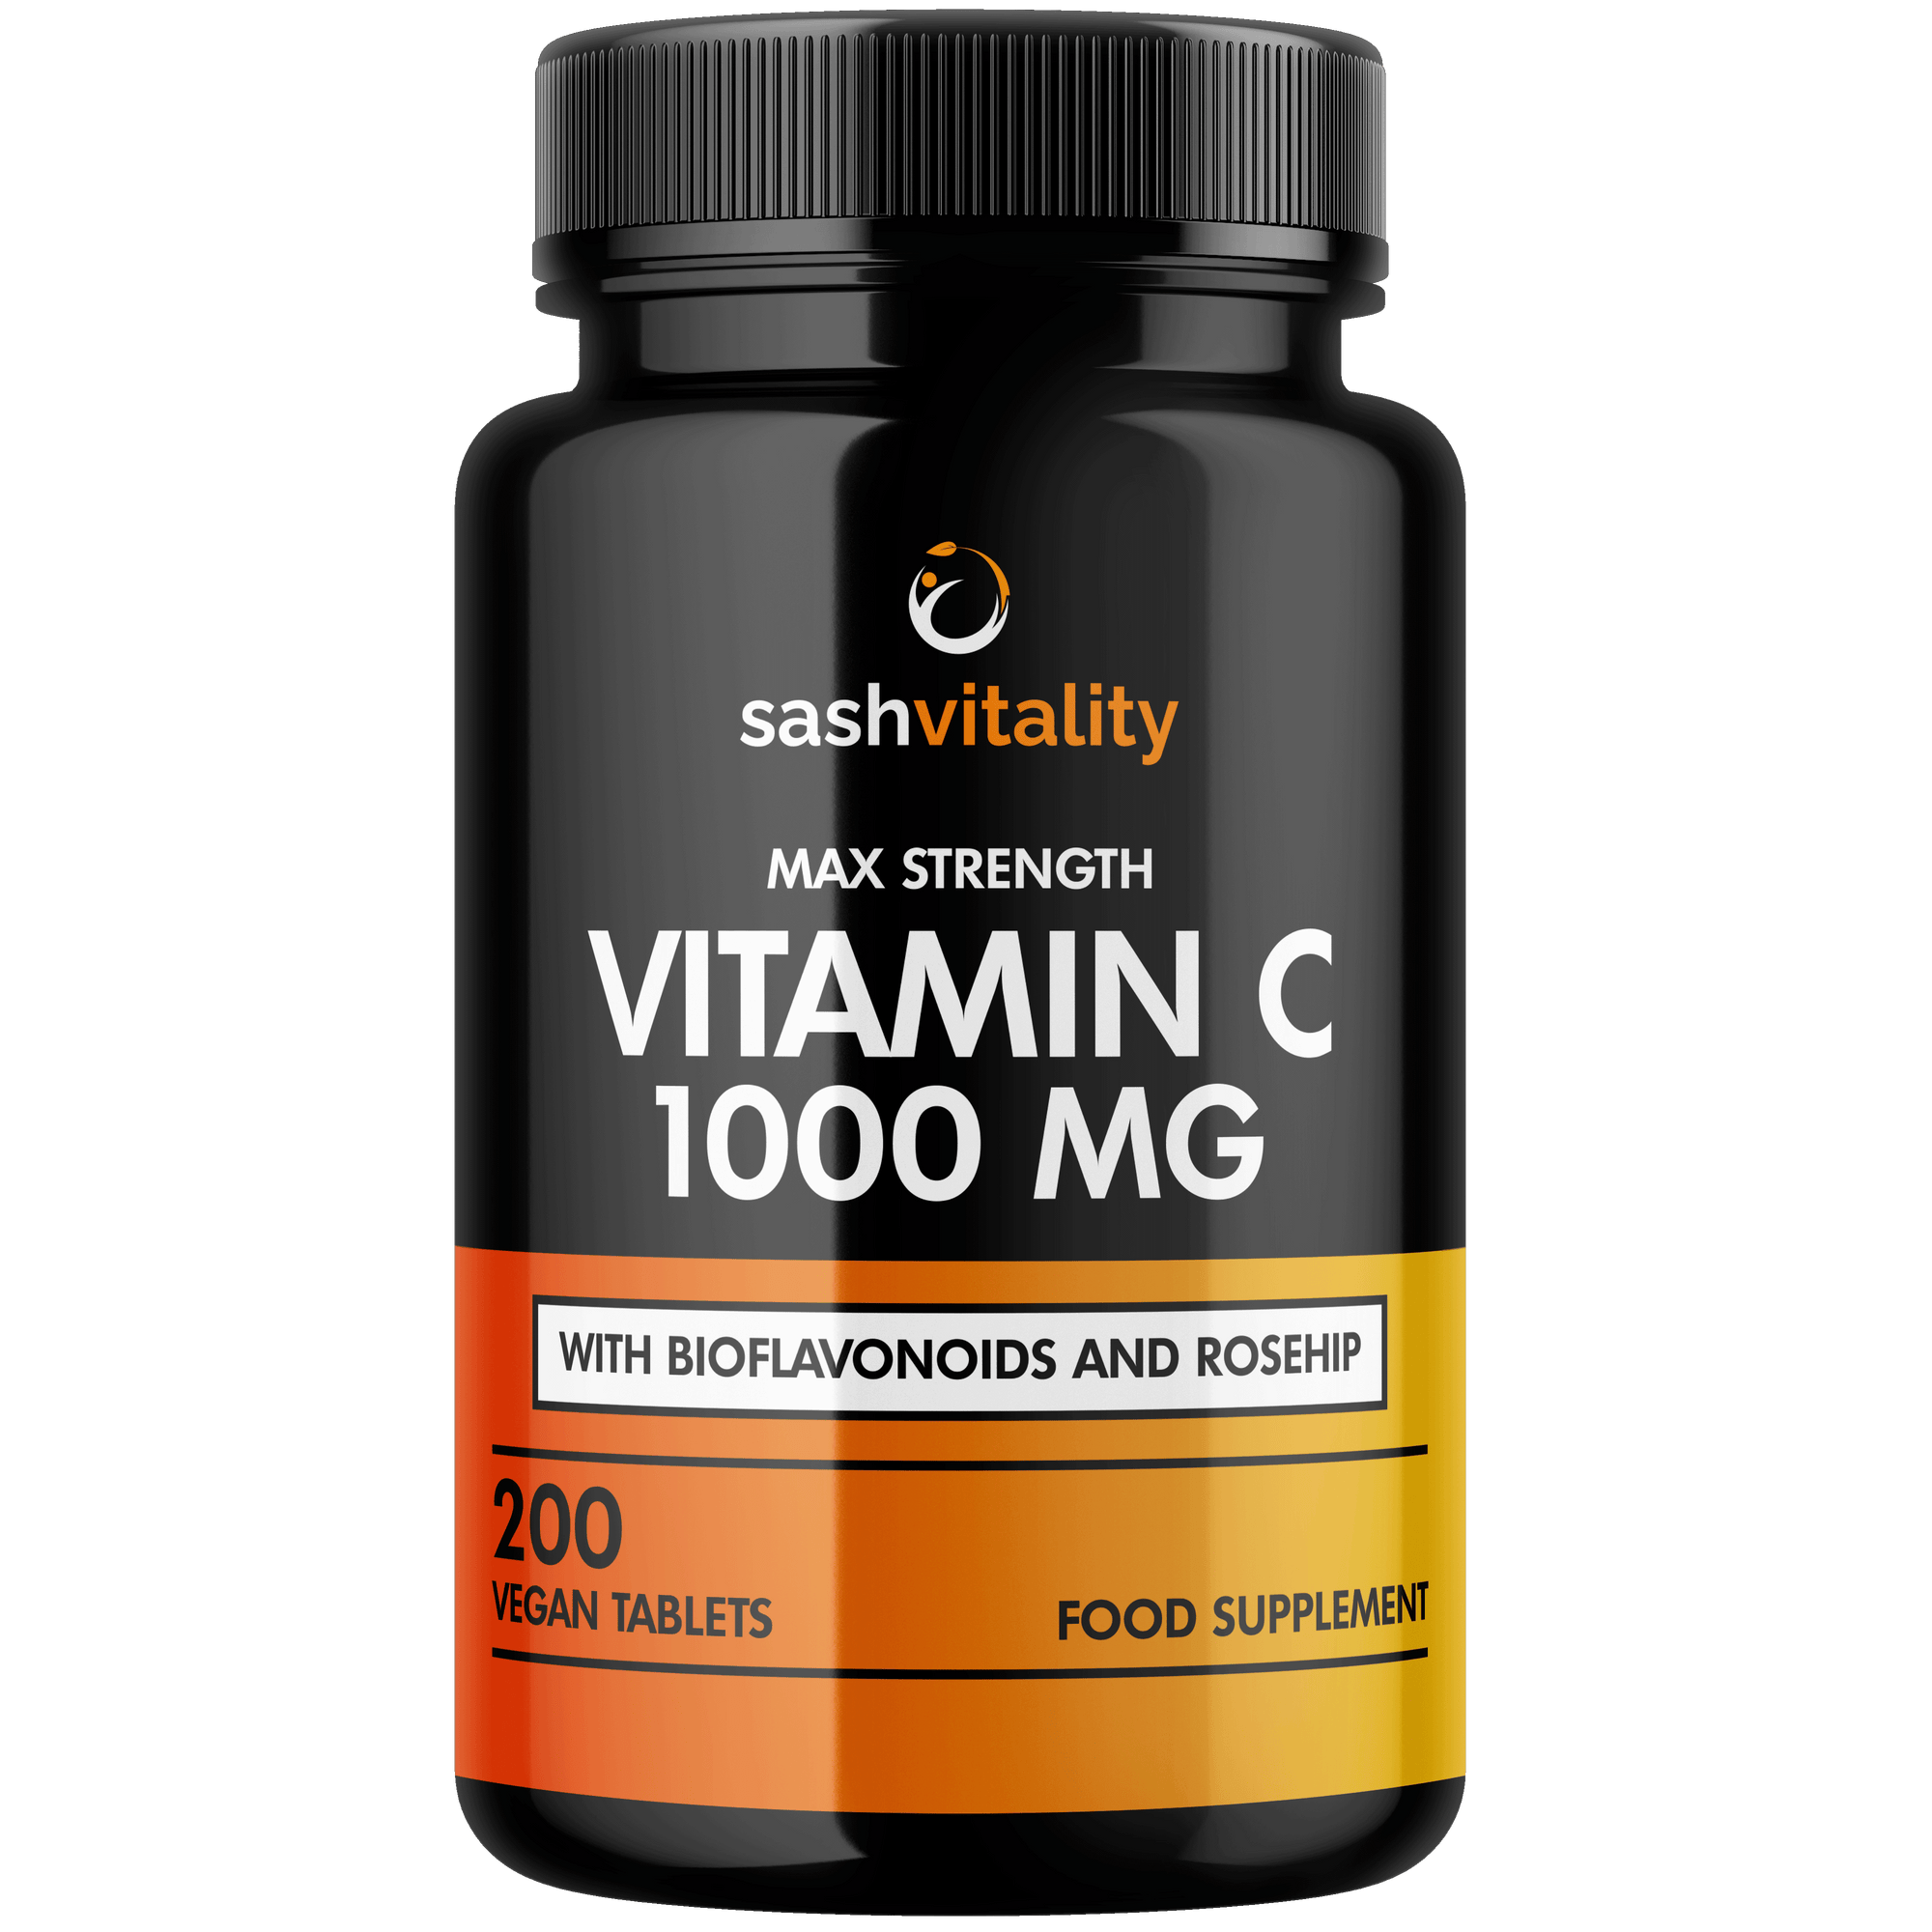 Vitamin C 1000mg - 200 Vegan Tablets - Added Bioflavonoids & Rosehip - Supports The Immune System and Reduces Tiredness and Fatigue - UK Made Sash Vitality - Anti-Inflammatory - Allery support